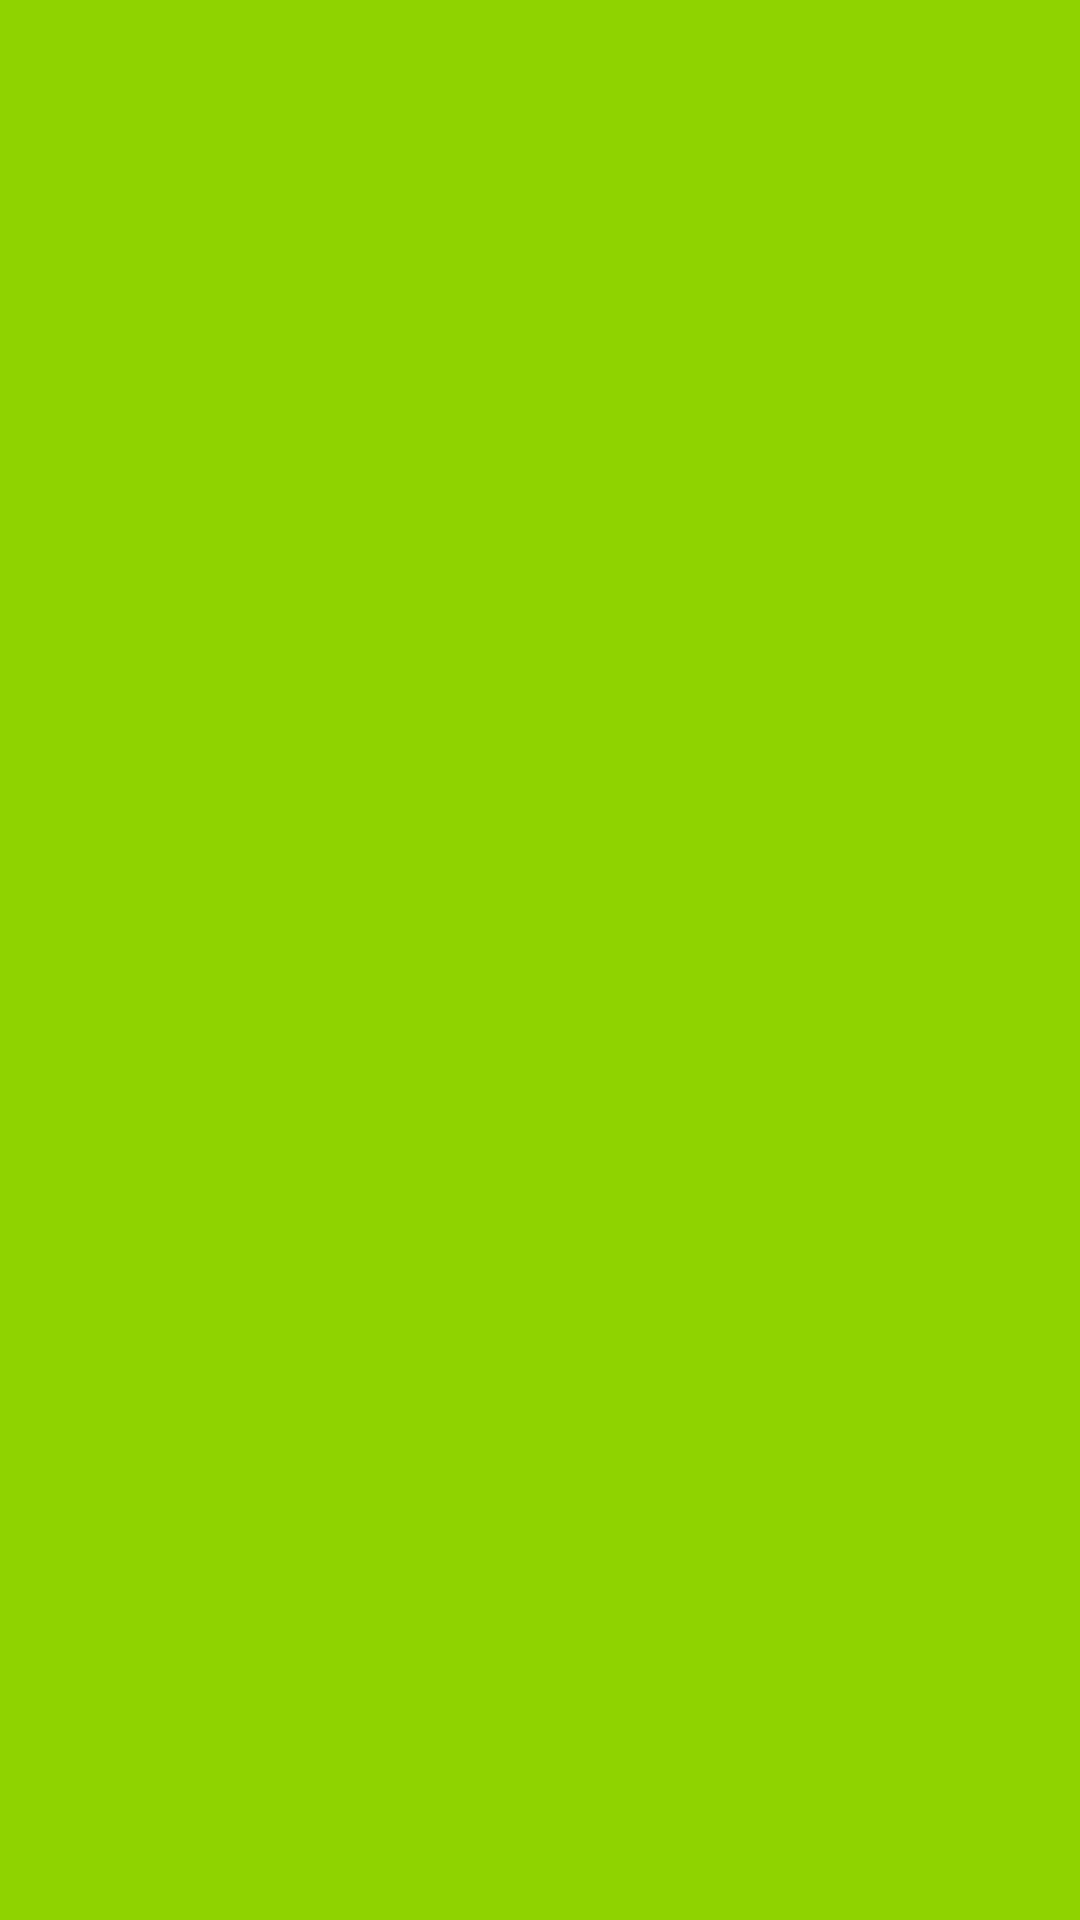 1080x1920 Sheen Green Solid Color Background